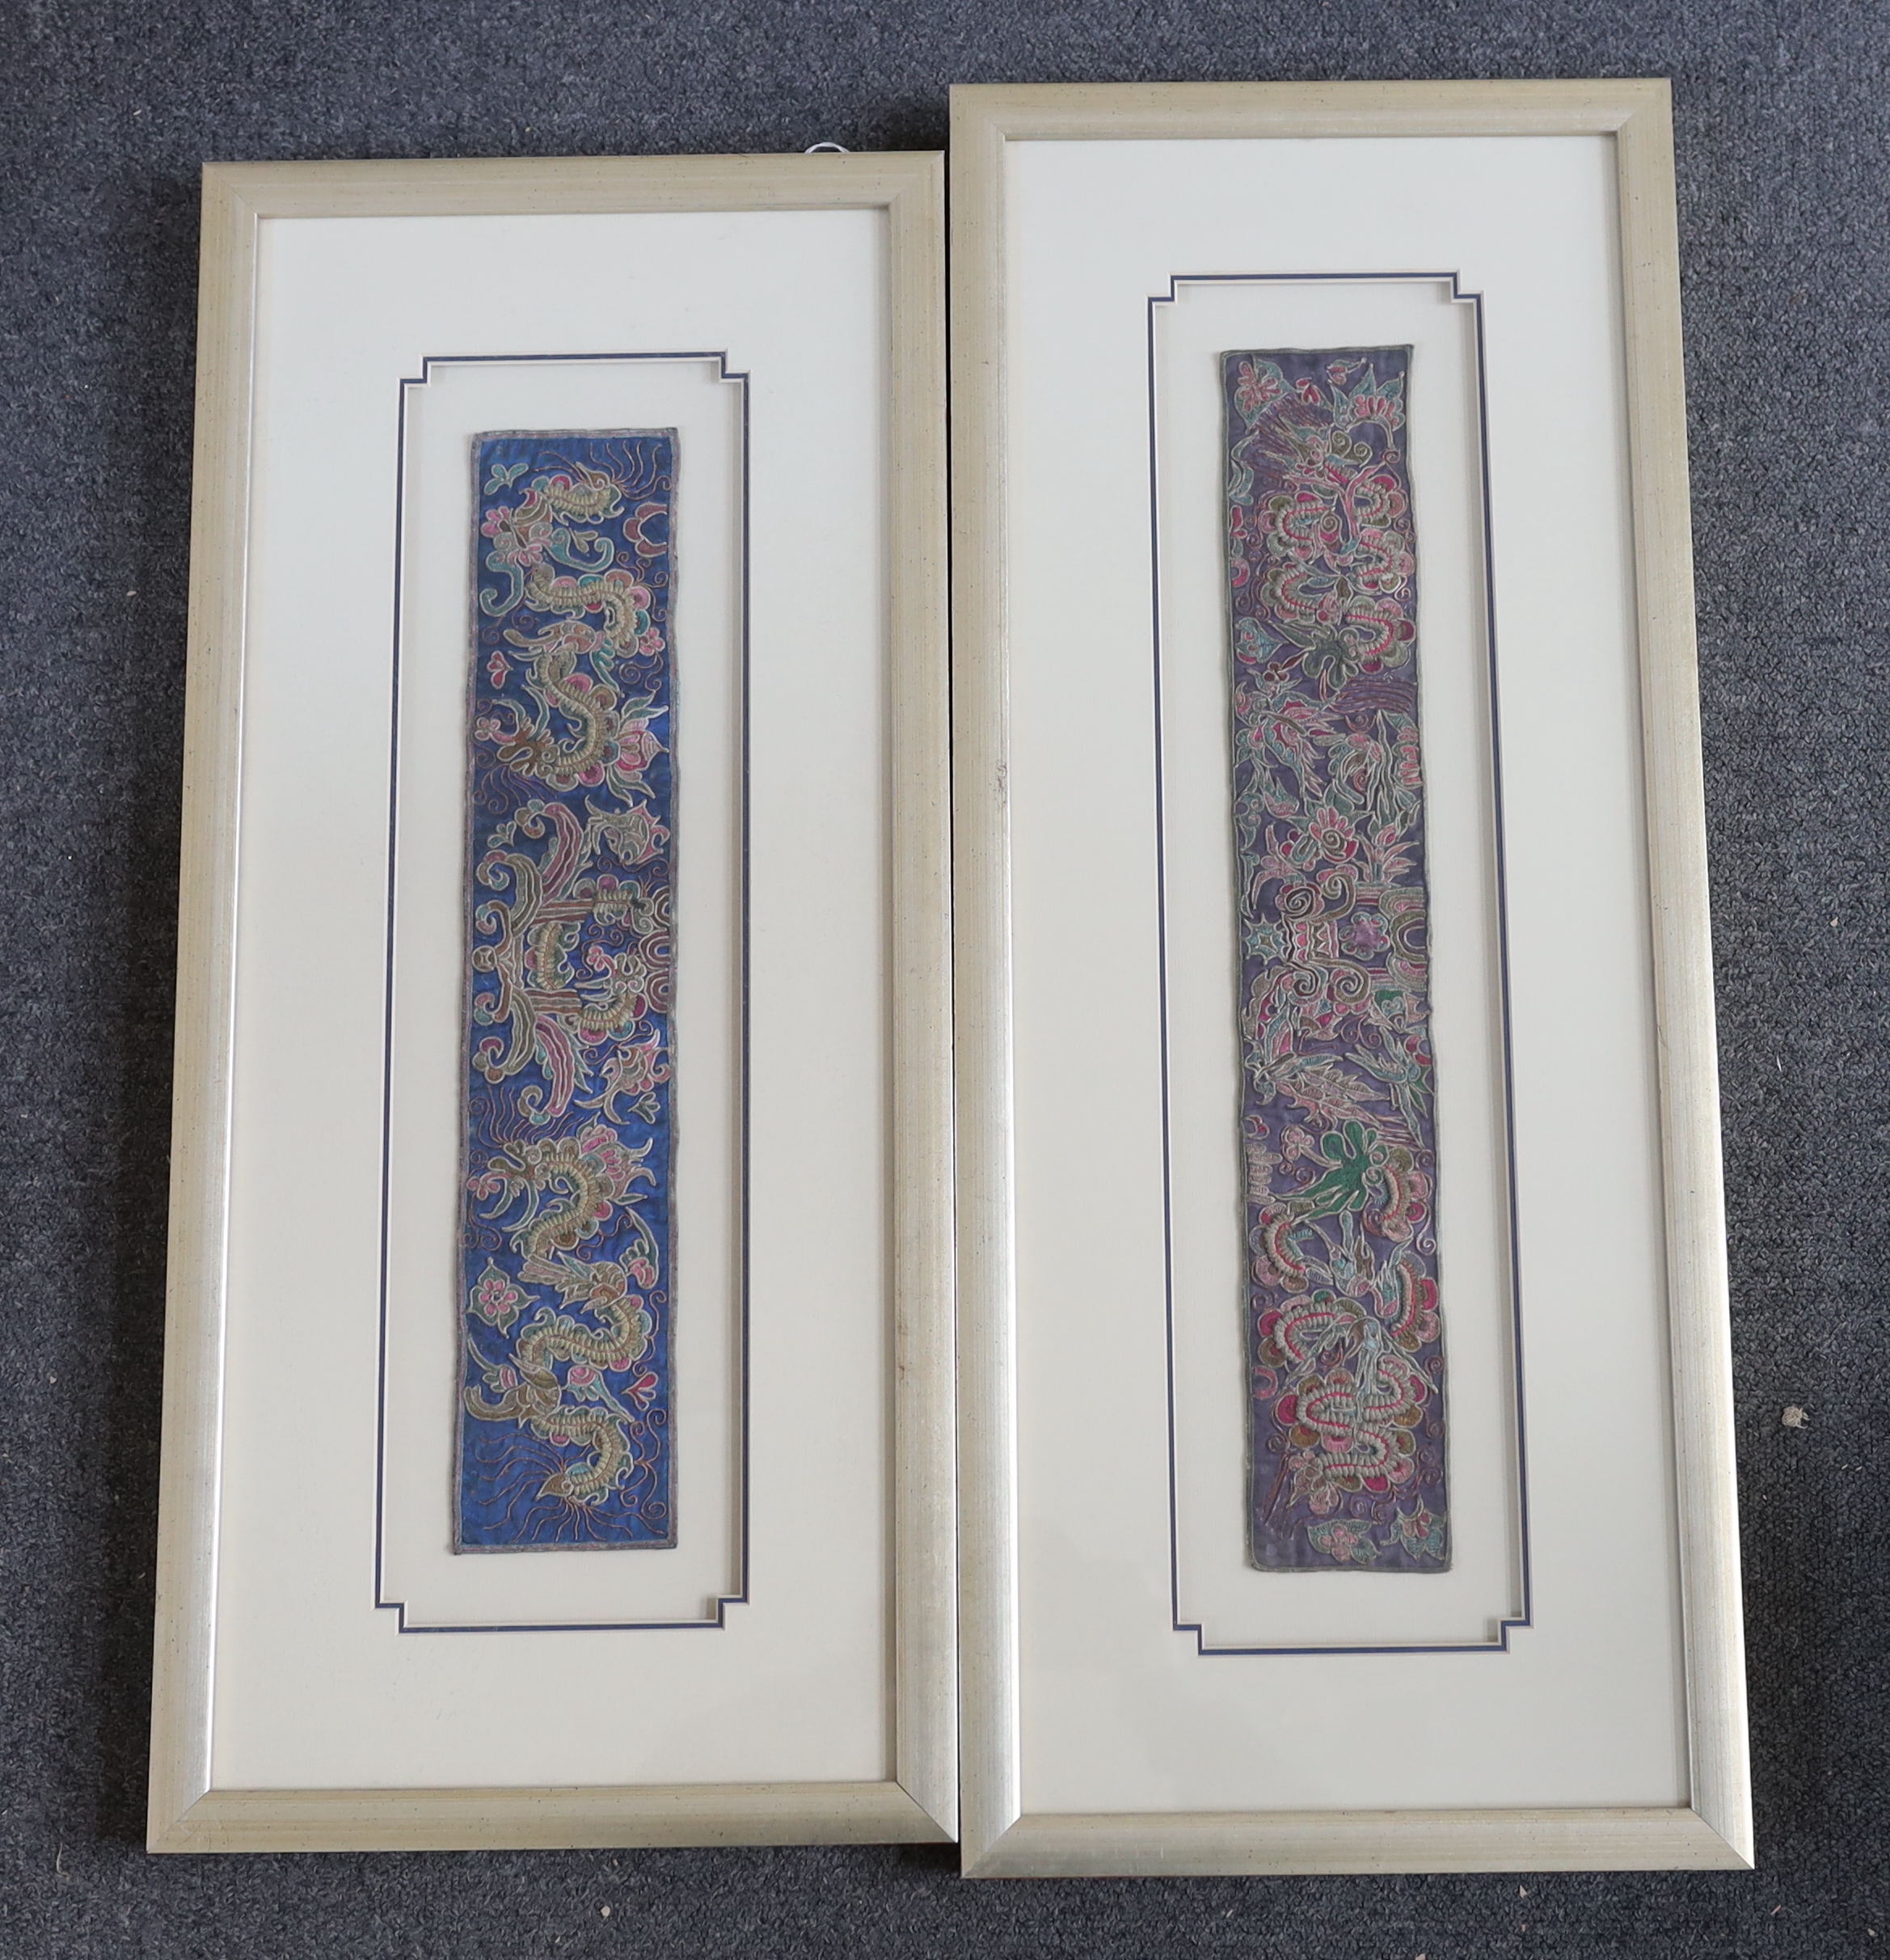 Two 19th century Chinese sleeve bands, embroidered in rich polychromes silks, designed with